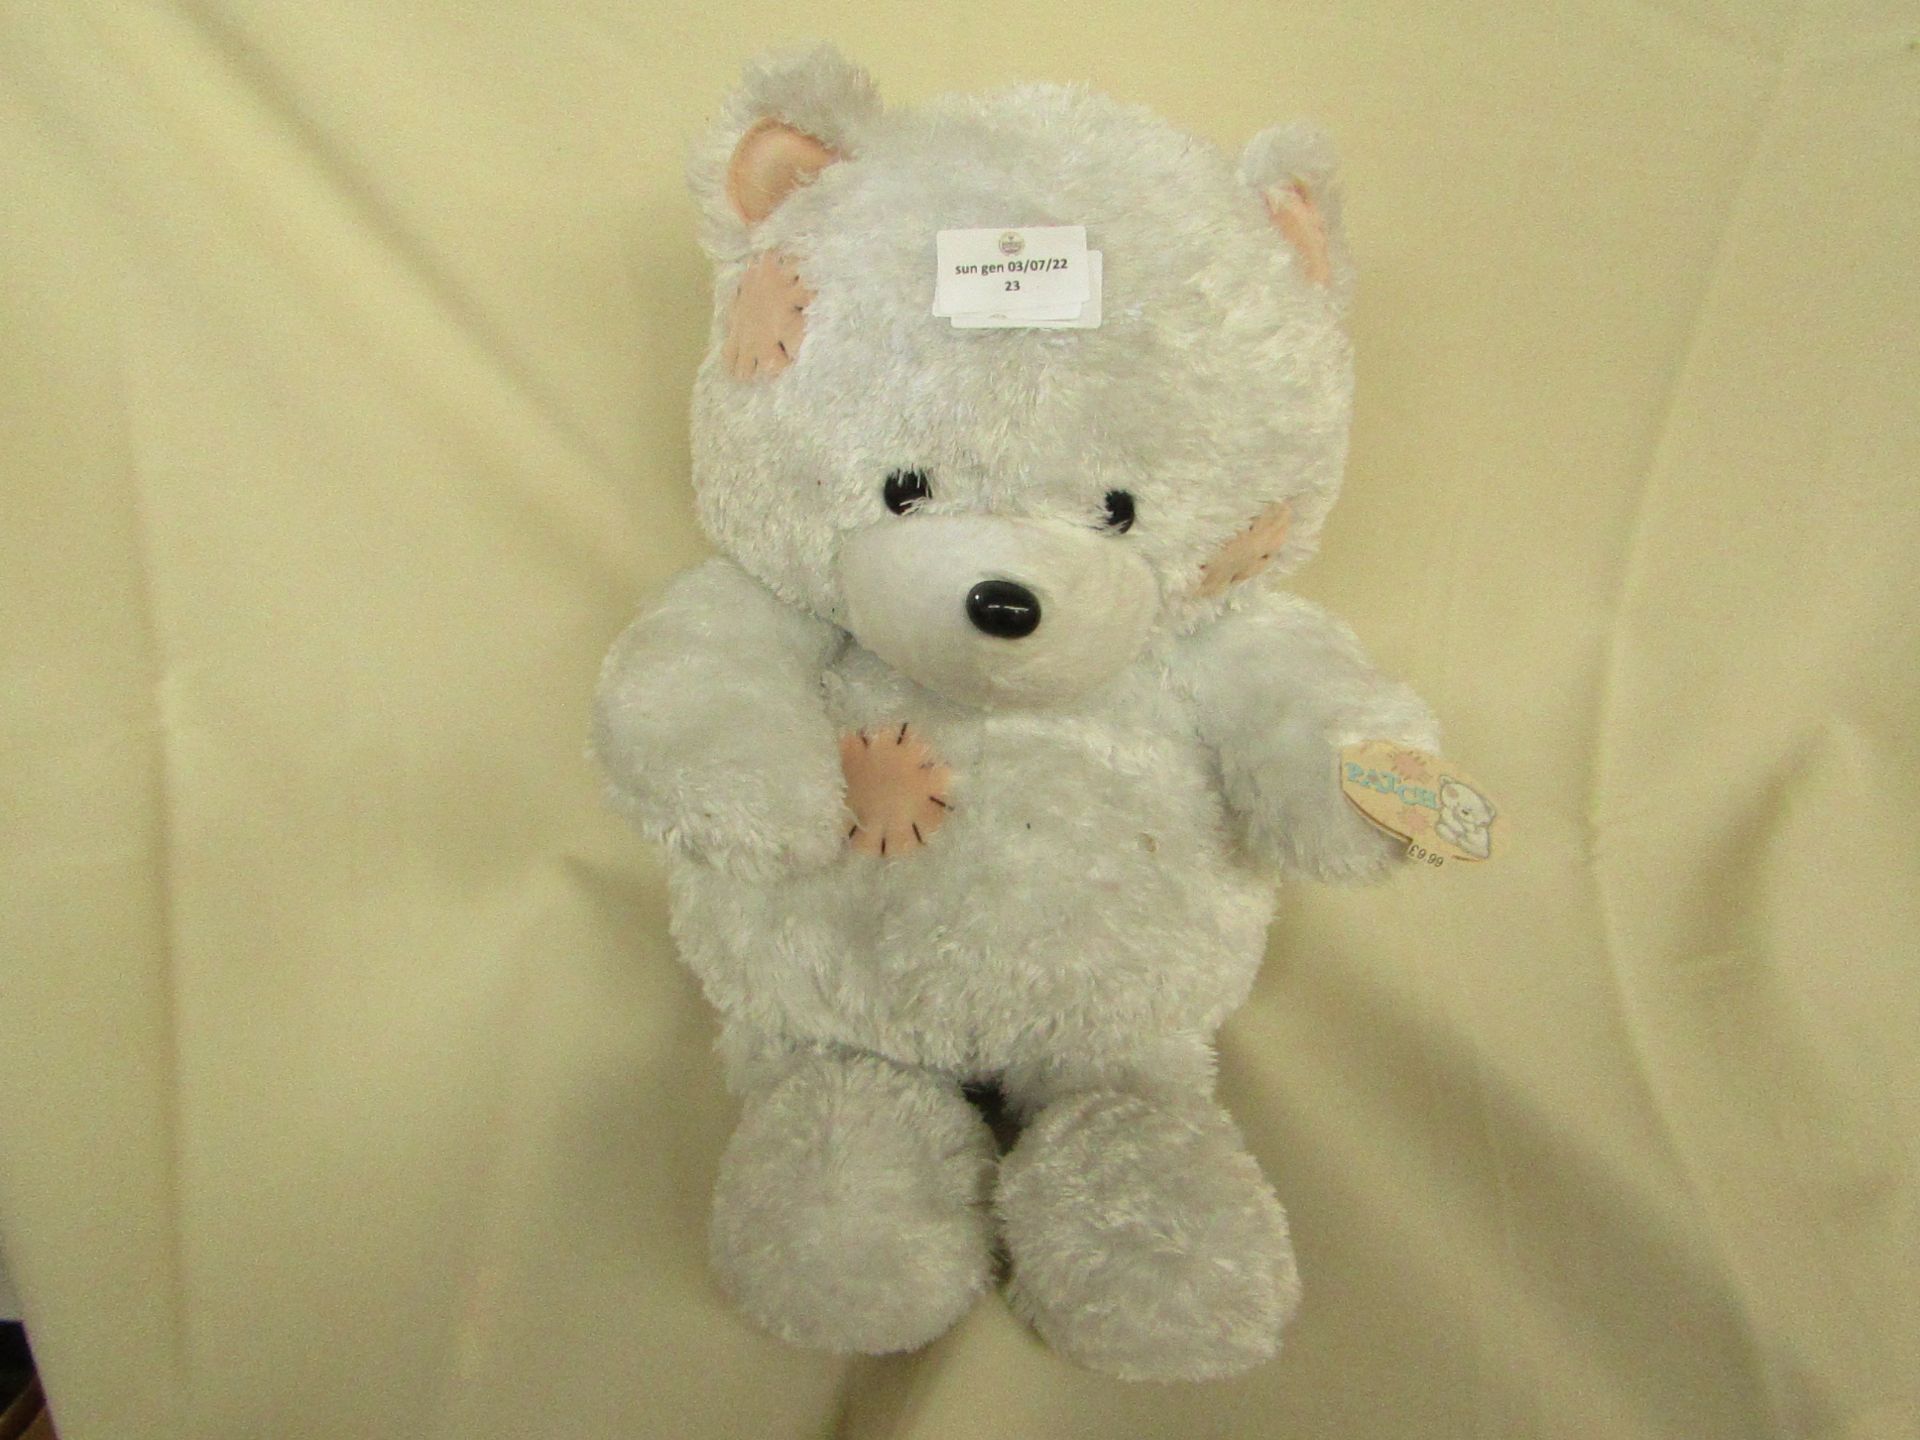 Patch - Plush Teddy - No Packaging.